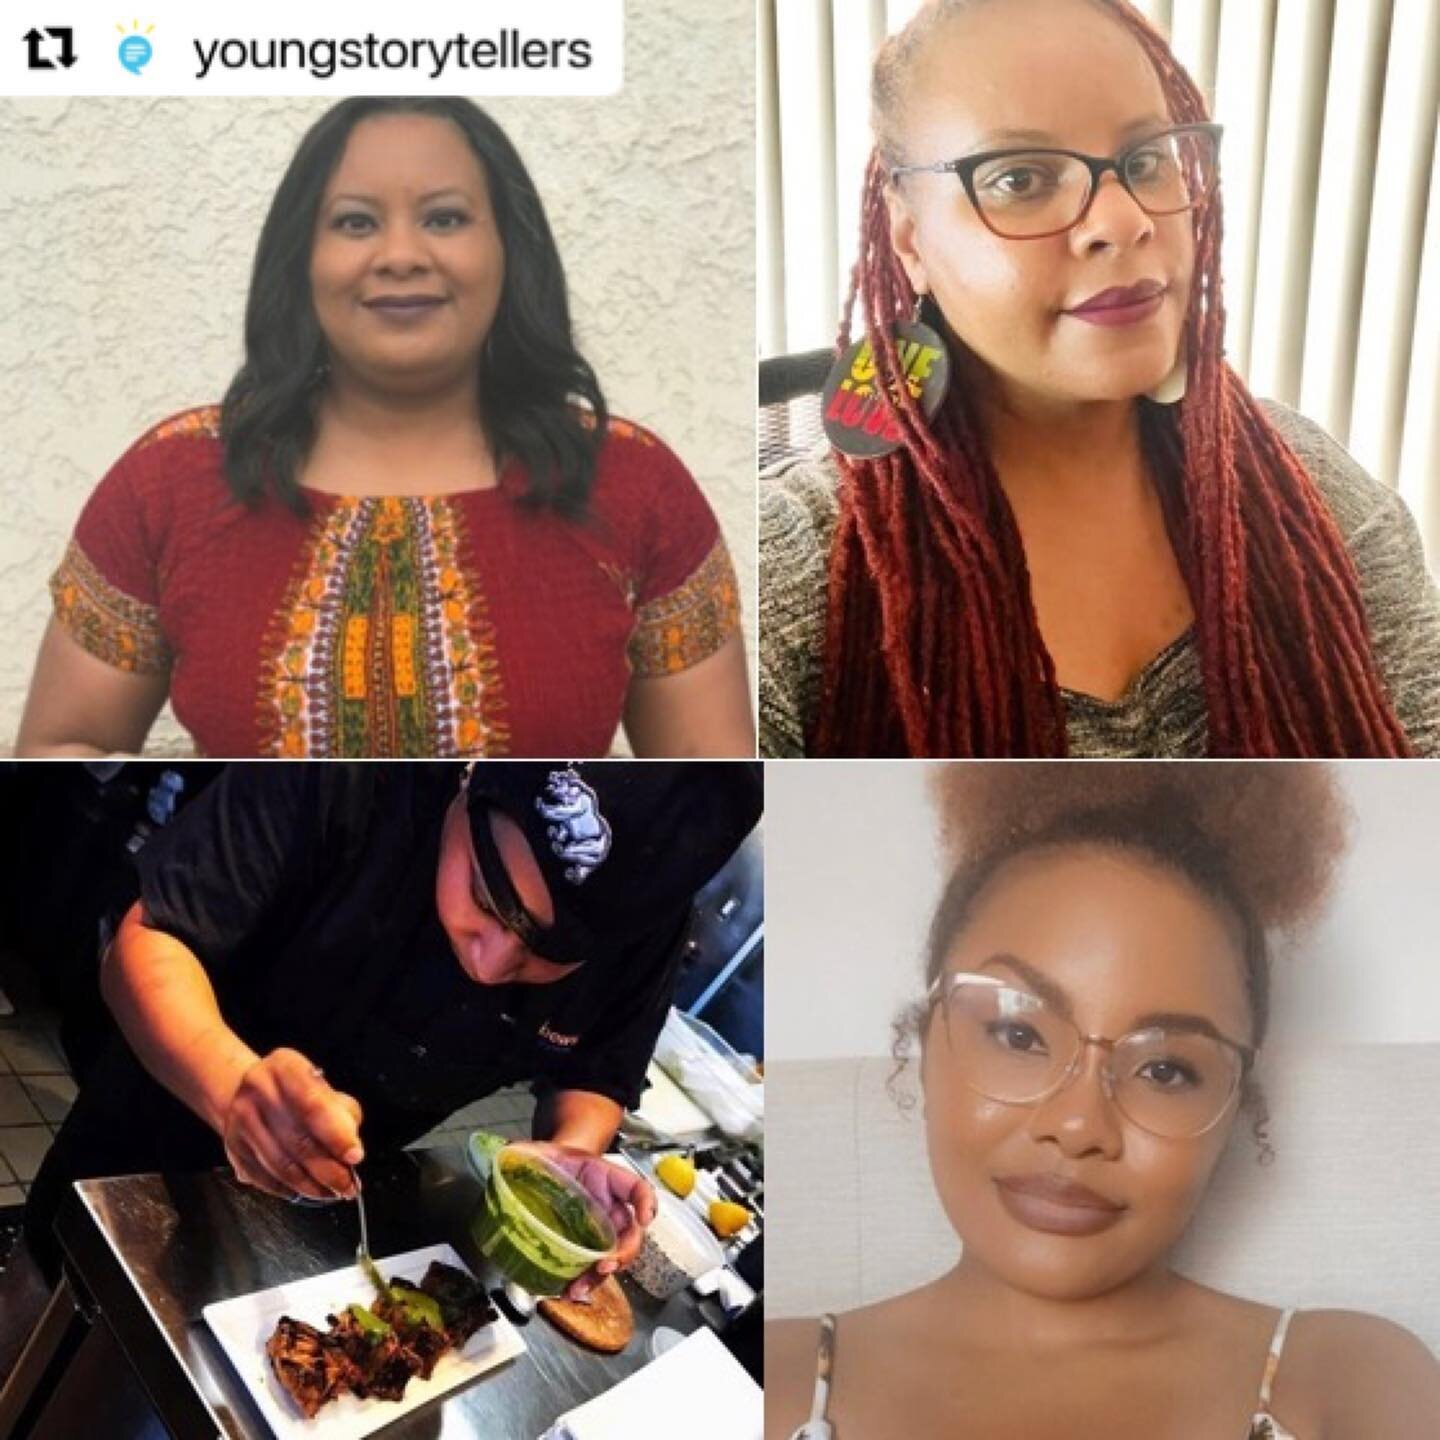 #Repost @youngstorytellers with @make_repost
・・・
As part of our Storyteller Spotlight Series for Black History Month, today we'd like to highlight @urbandecadencecatering! Urban Decadence, a Black women-owned family catering business, provided cateri